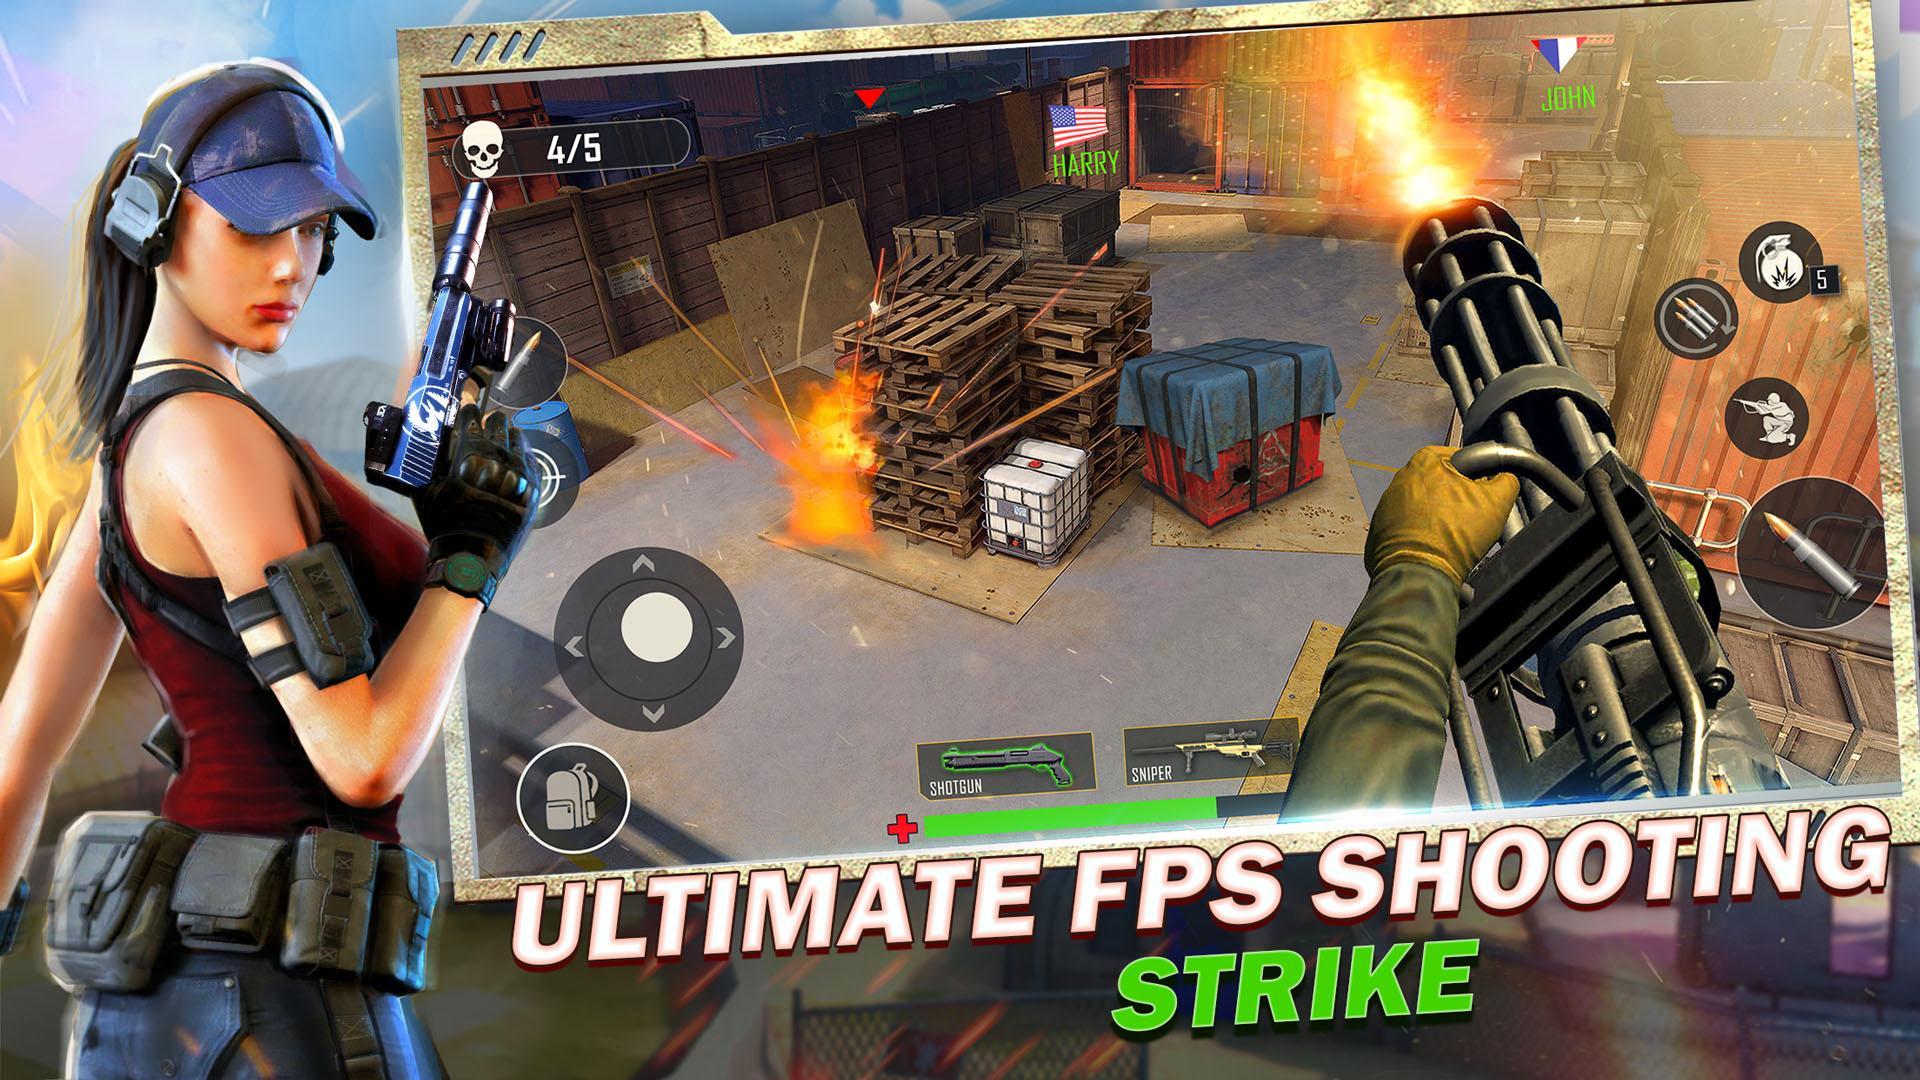 Modern Commando Secret Mission Free Shooting Games For Android Apk Download